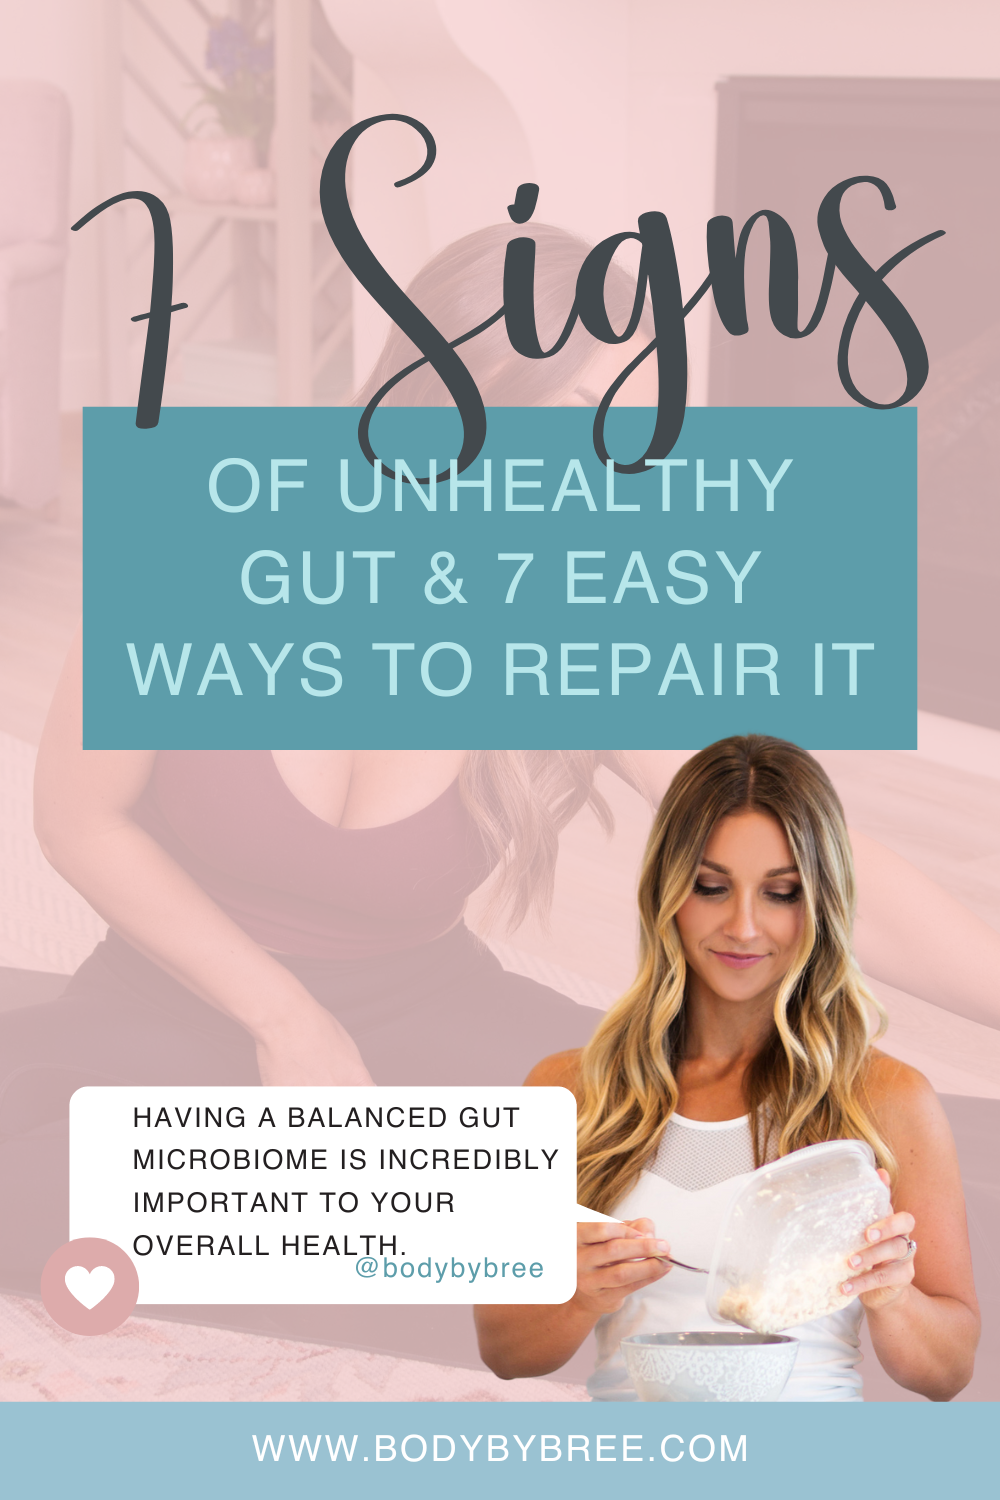 7 SIGNS OF AN UNHEALTHY GUT AND 7 EASY WAYS TO REPAIR IT